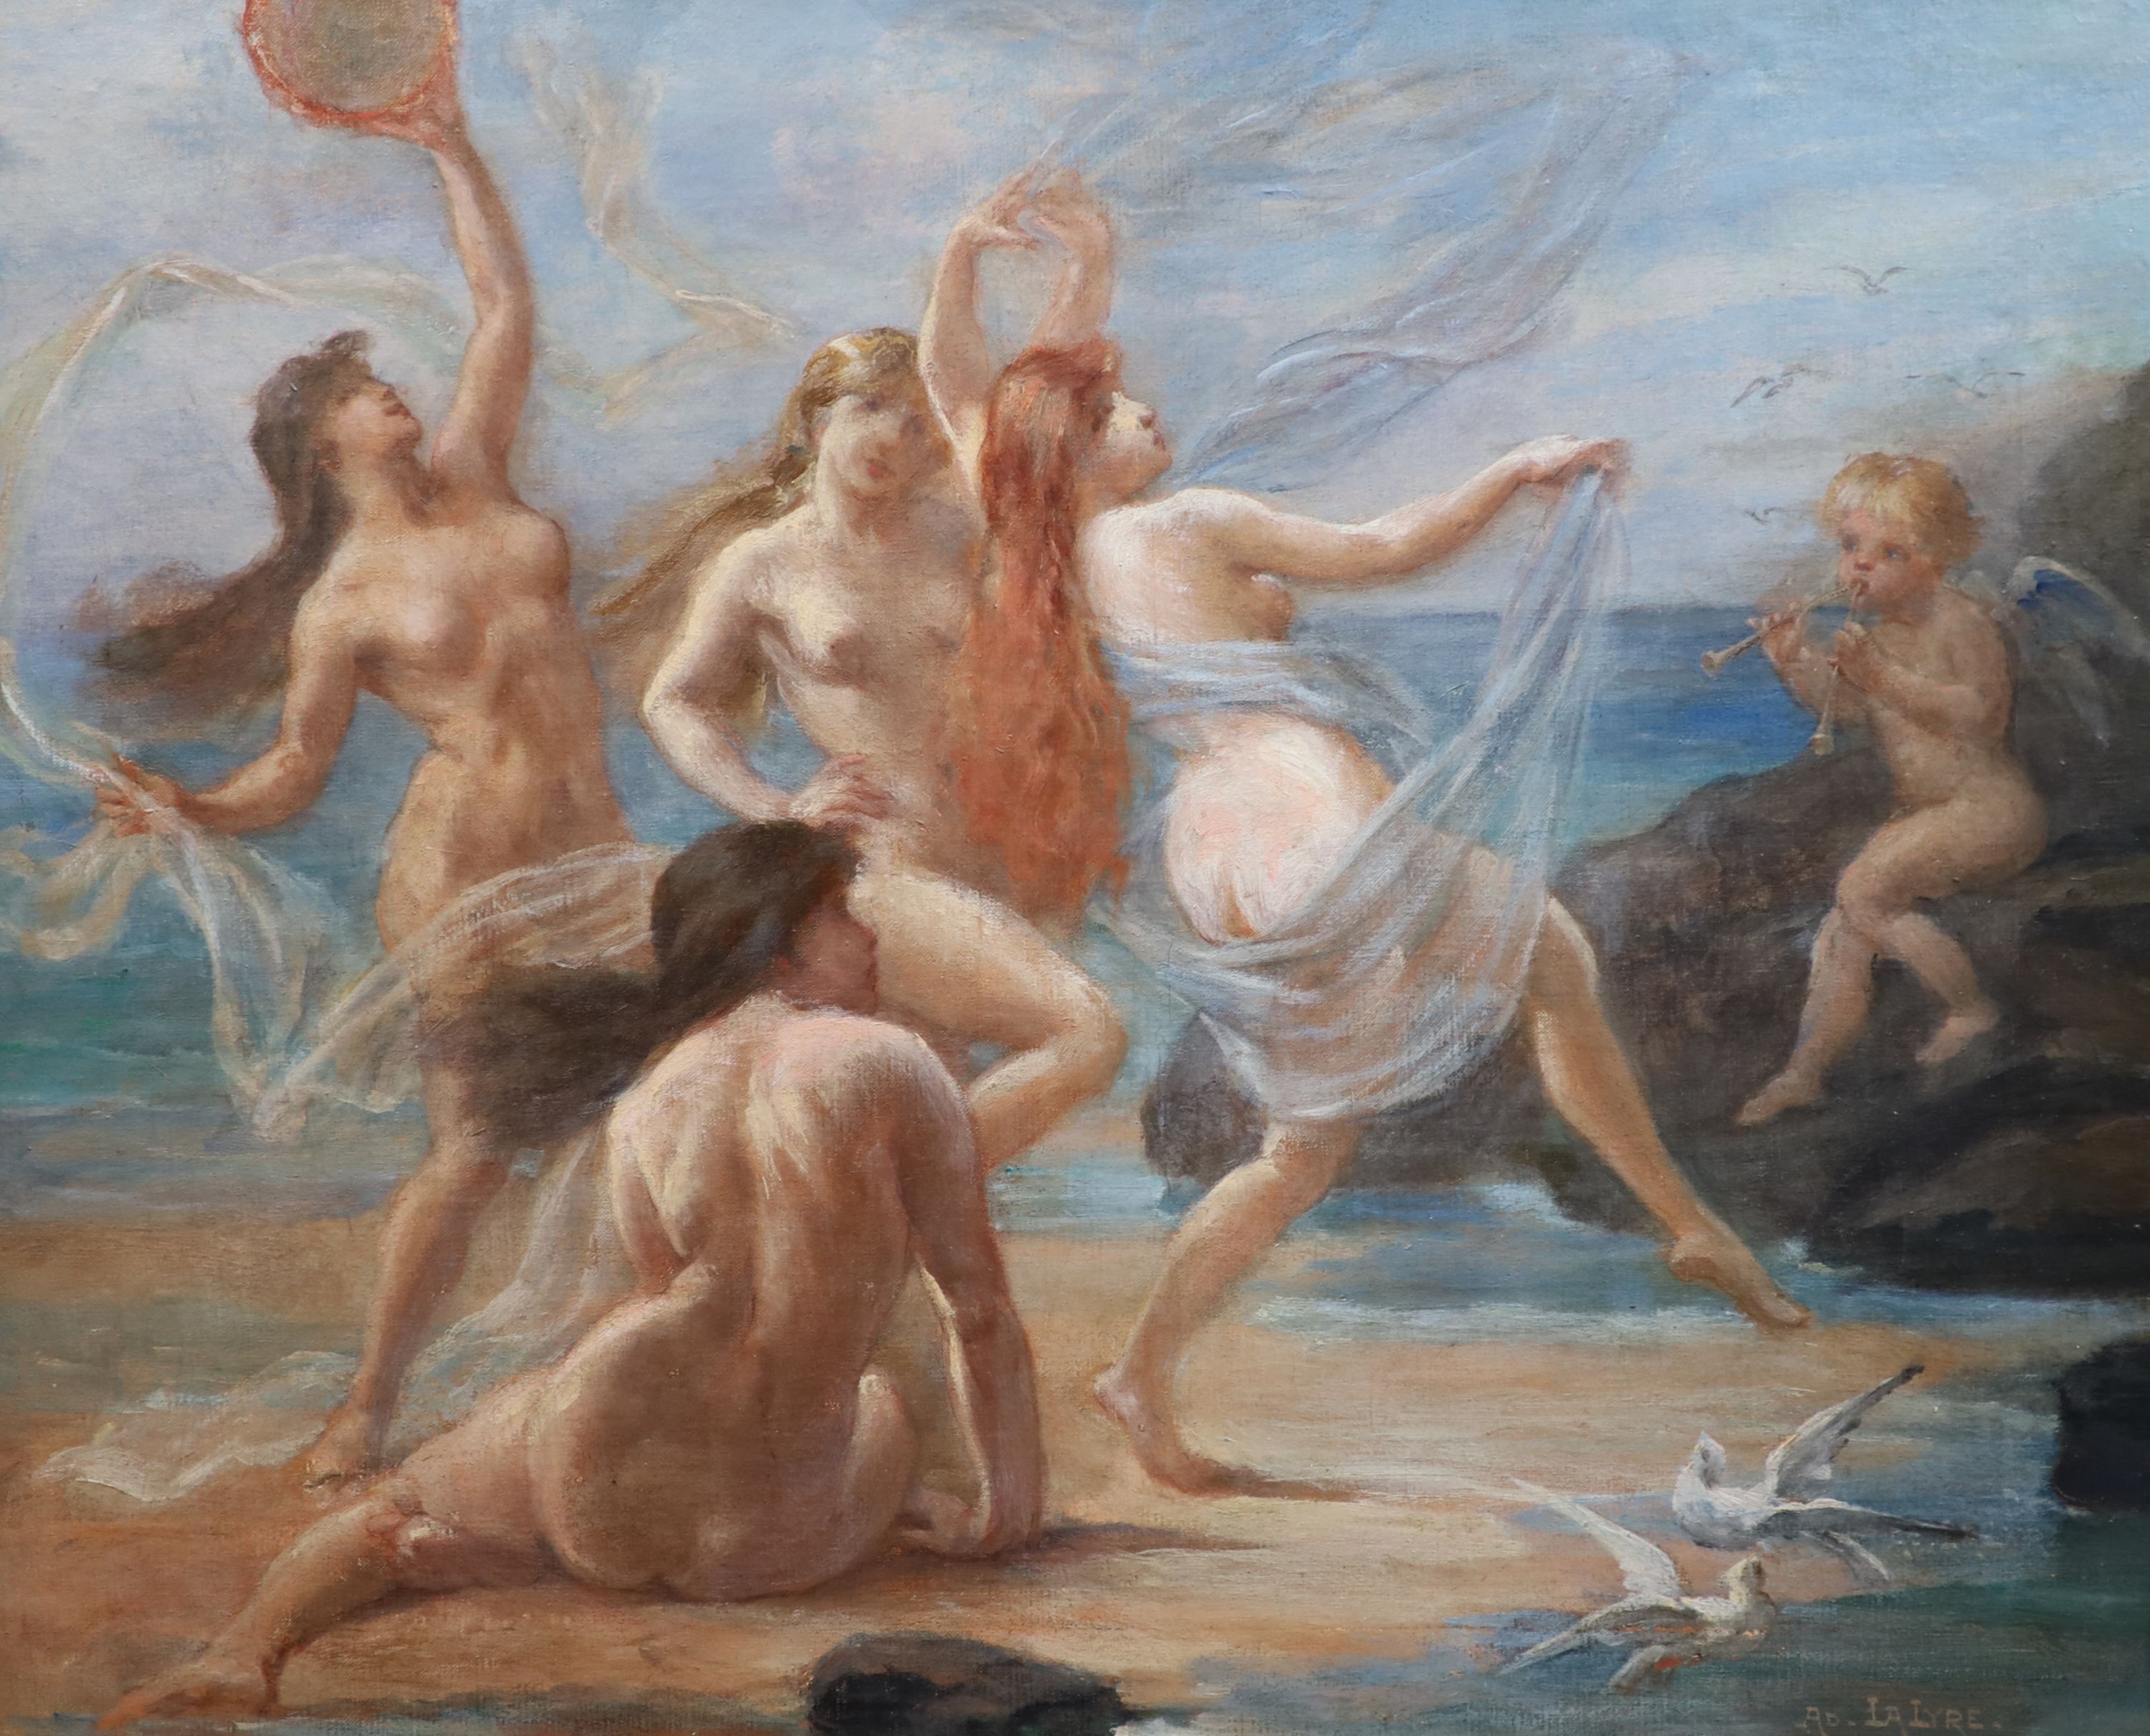 Adolphe Lalyre (French, (1848-1933), Sirens and Cupid dancing along the seashore, oil on canvas, 58 x 71cm